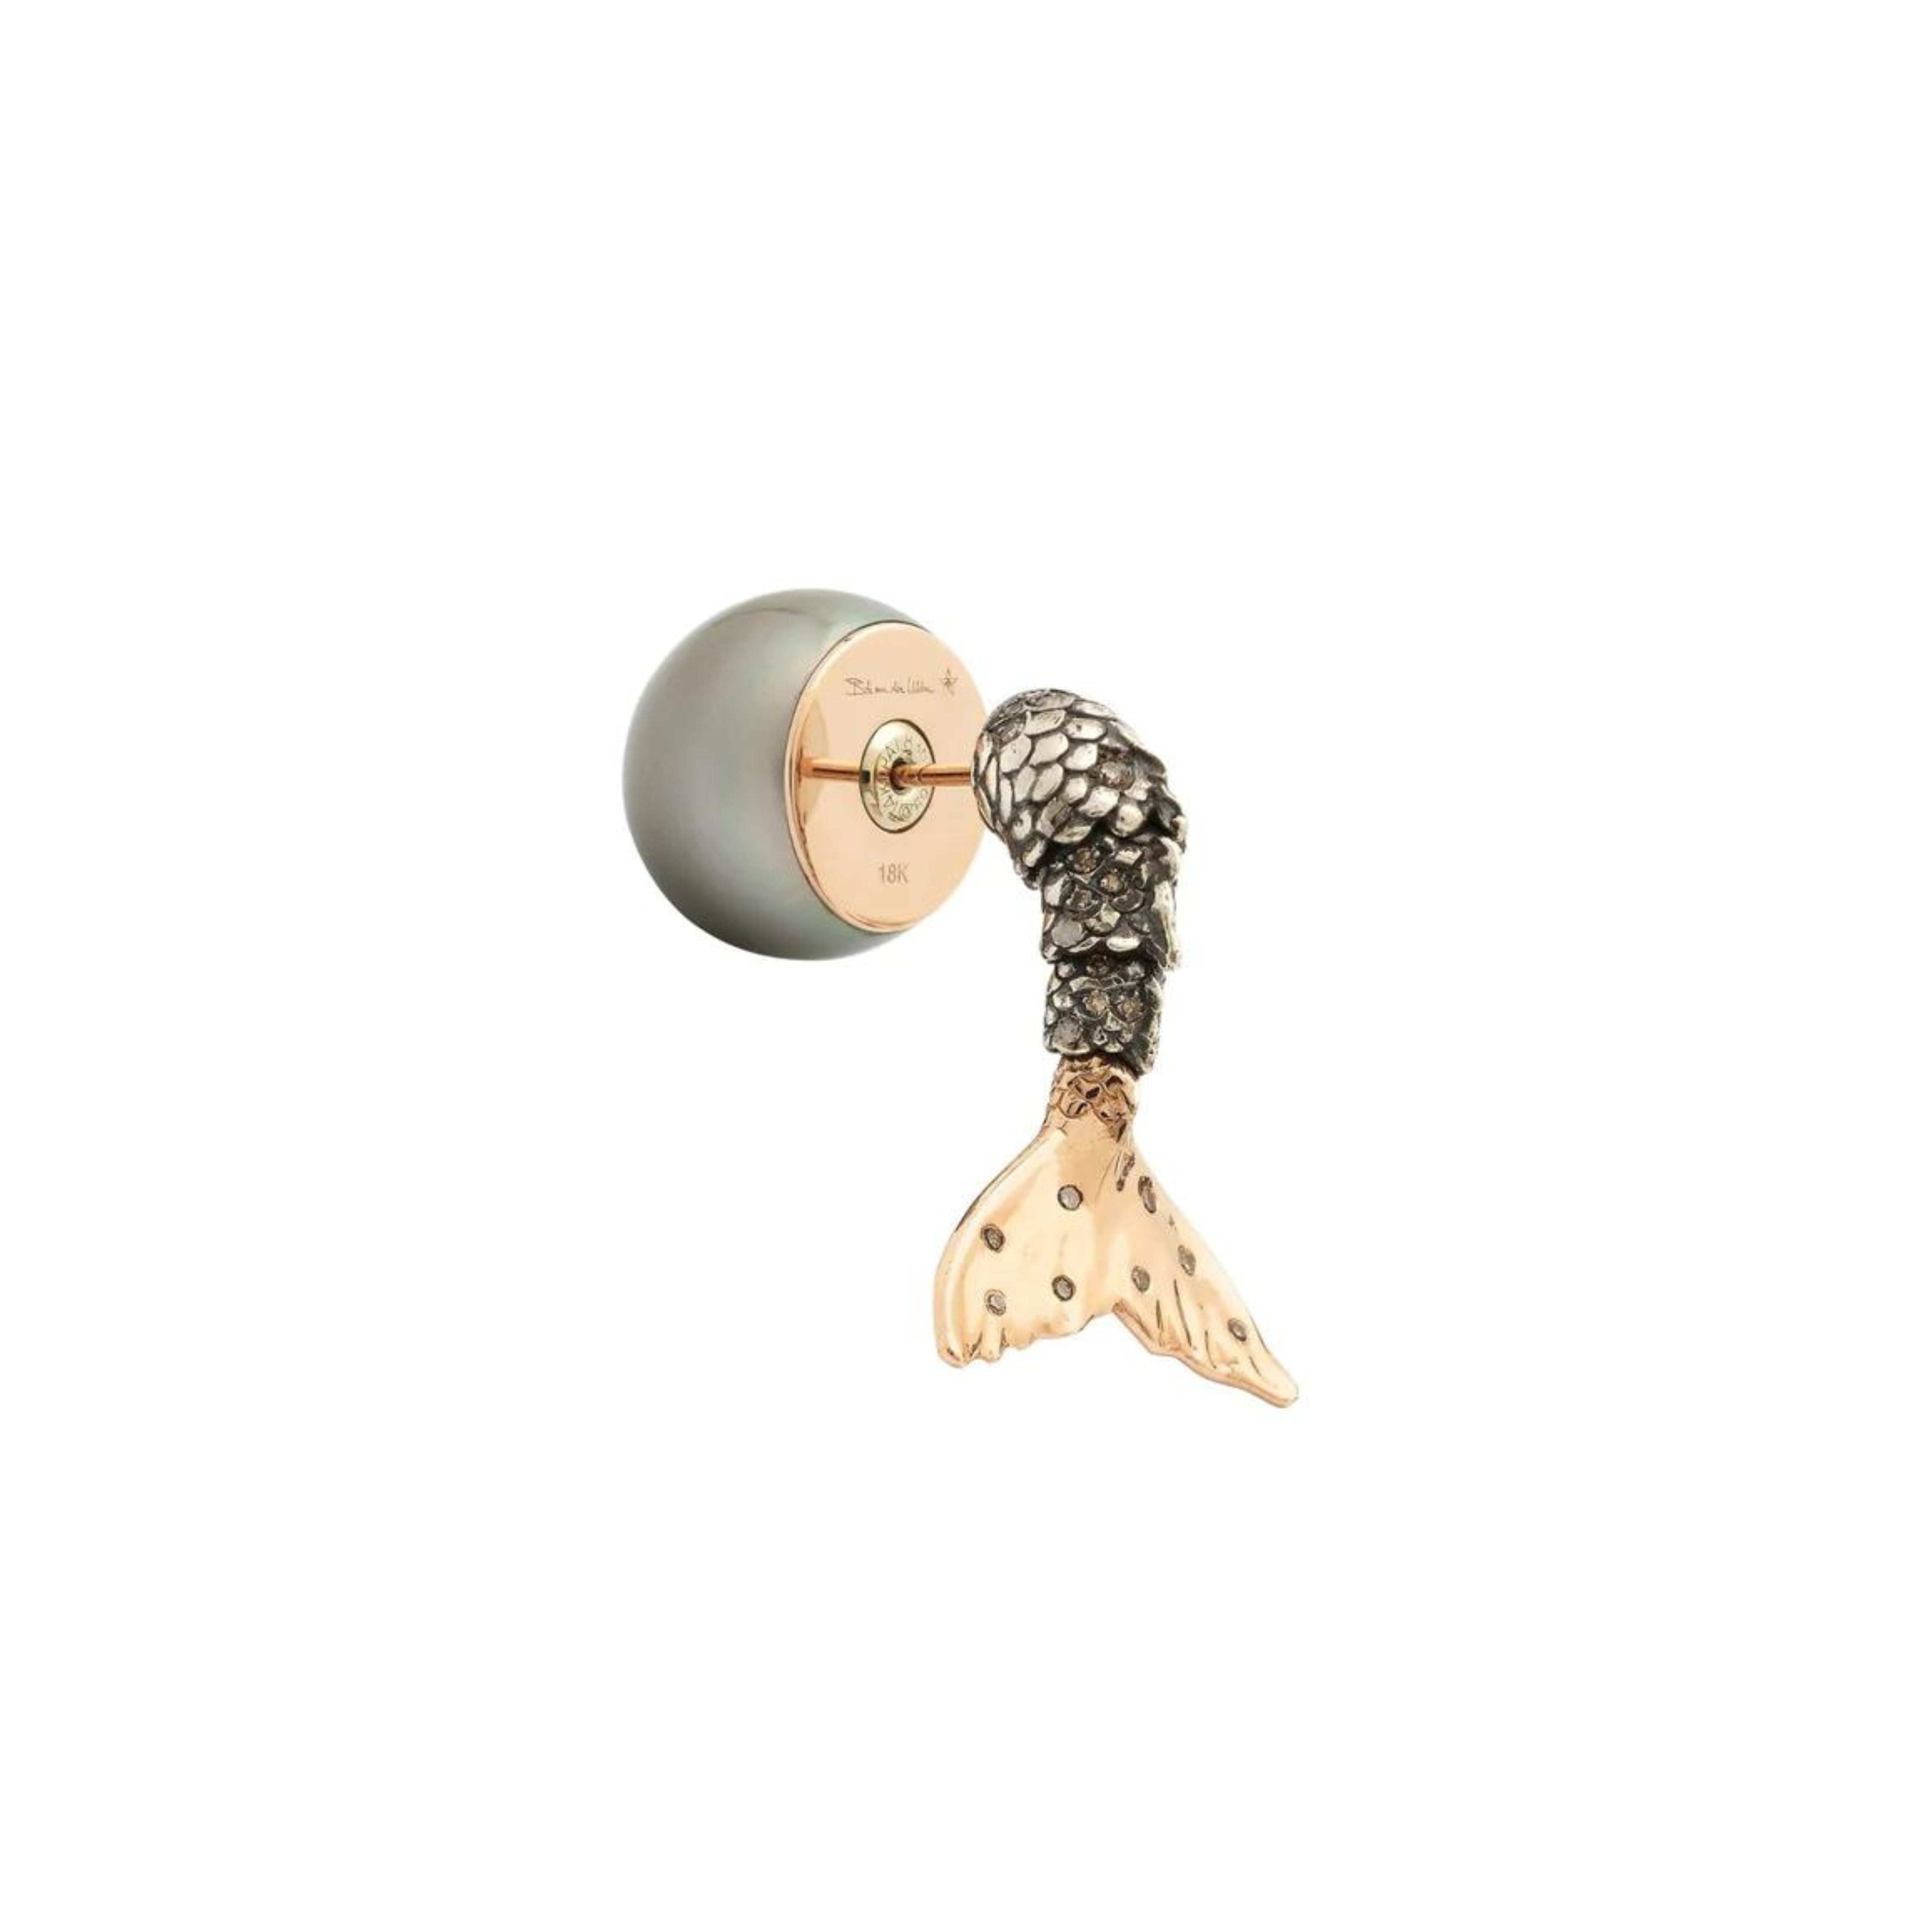 Bibi van der Velden Mermaid Pearl Earring. Made in 18K rose gold and sterling silver with a deep blue pearl and brown diamonds. Featuring a moving mermaid&#39;s tail with moving scales and gold fin. Shown from the side.